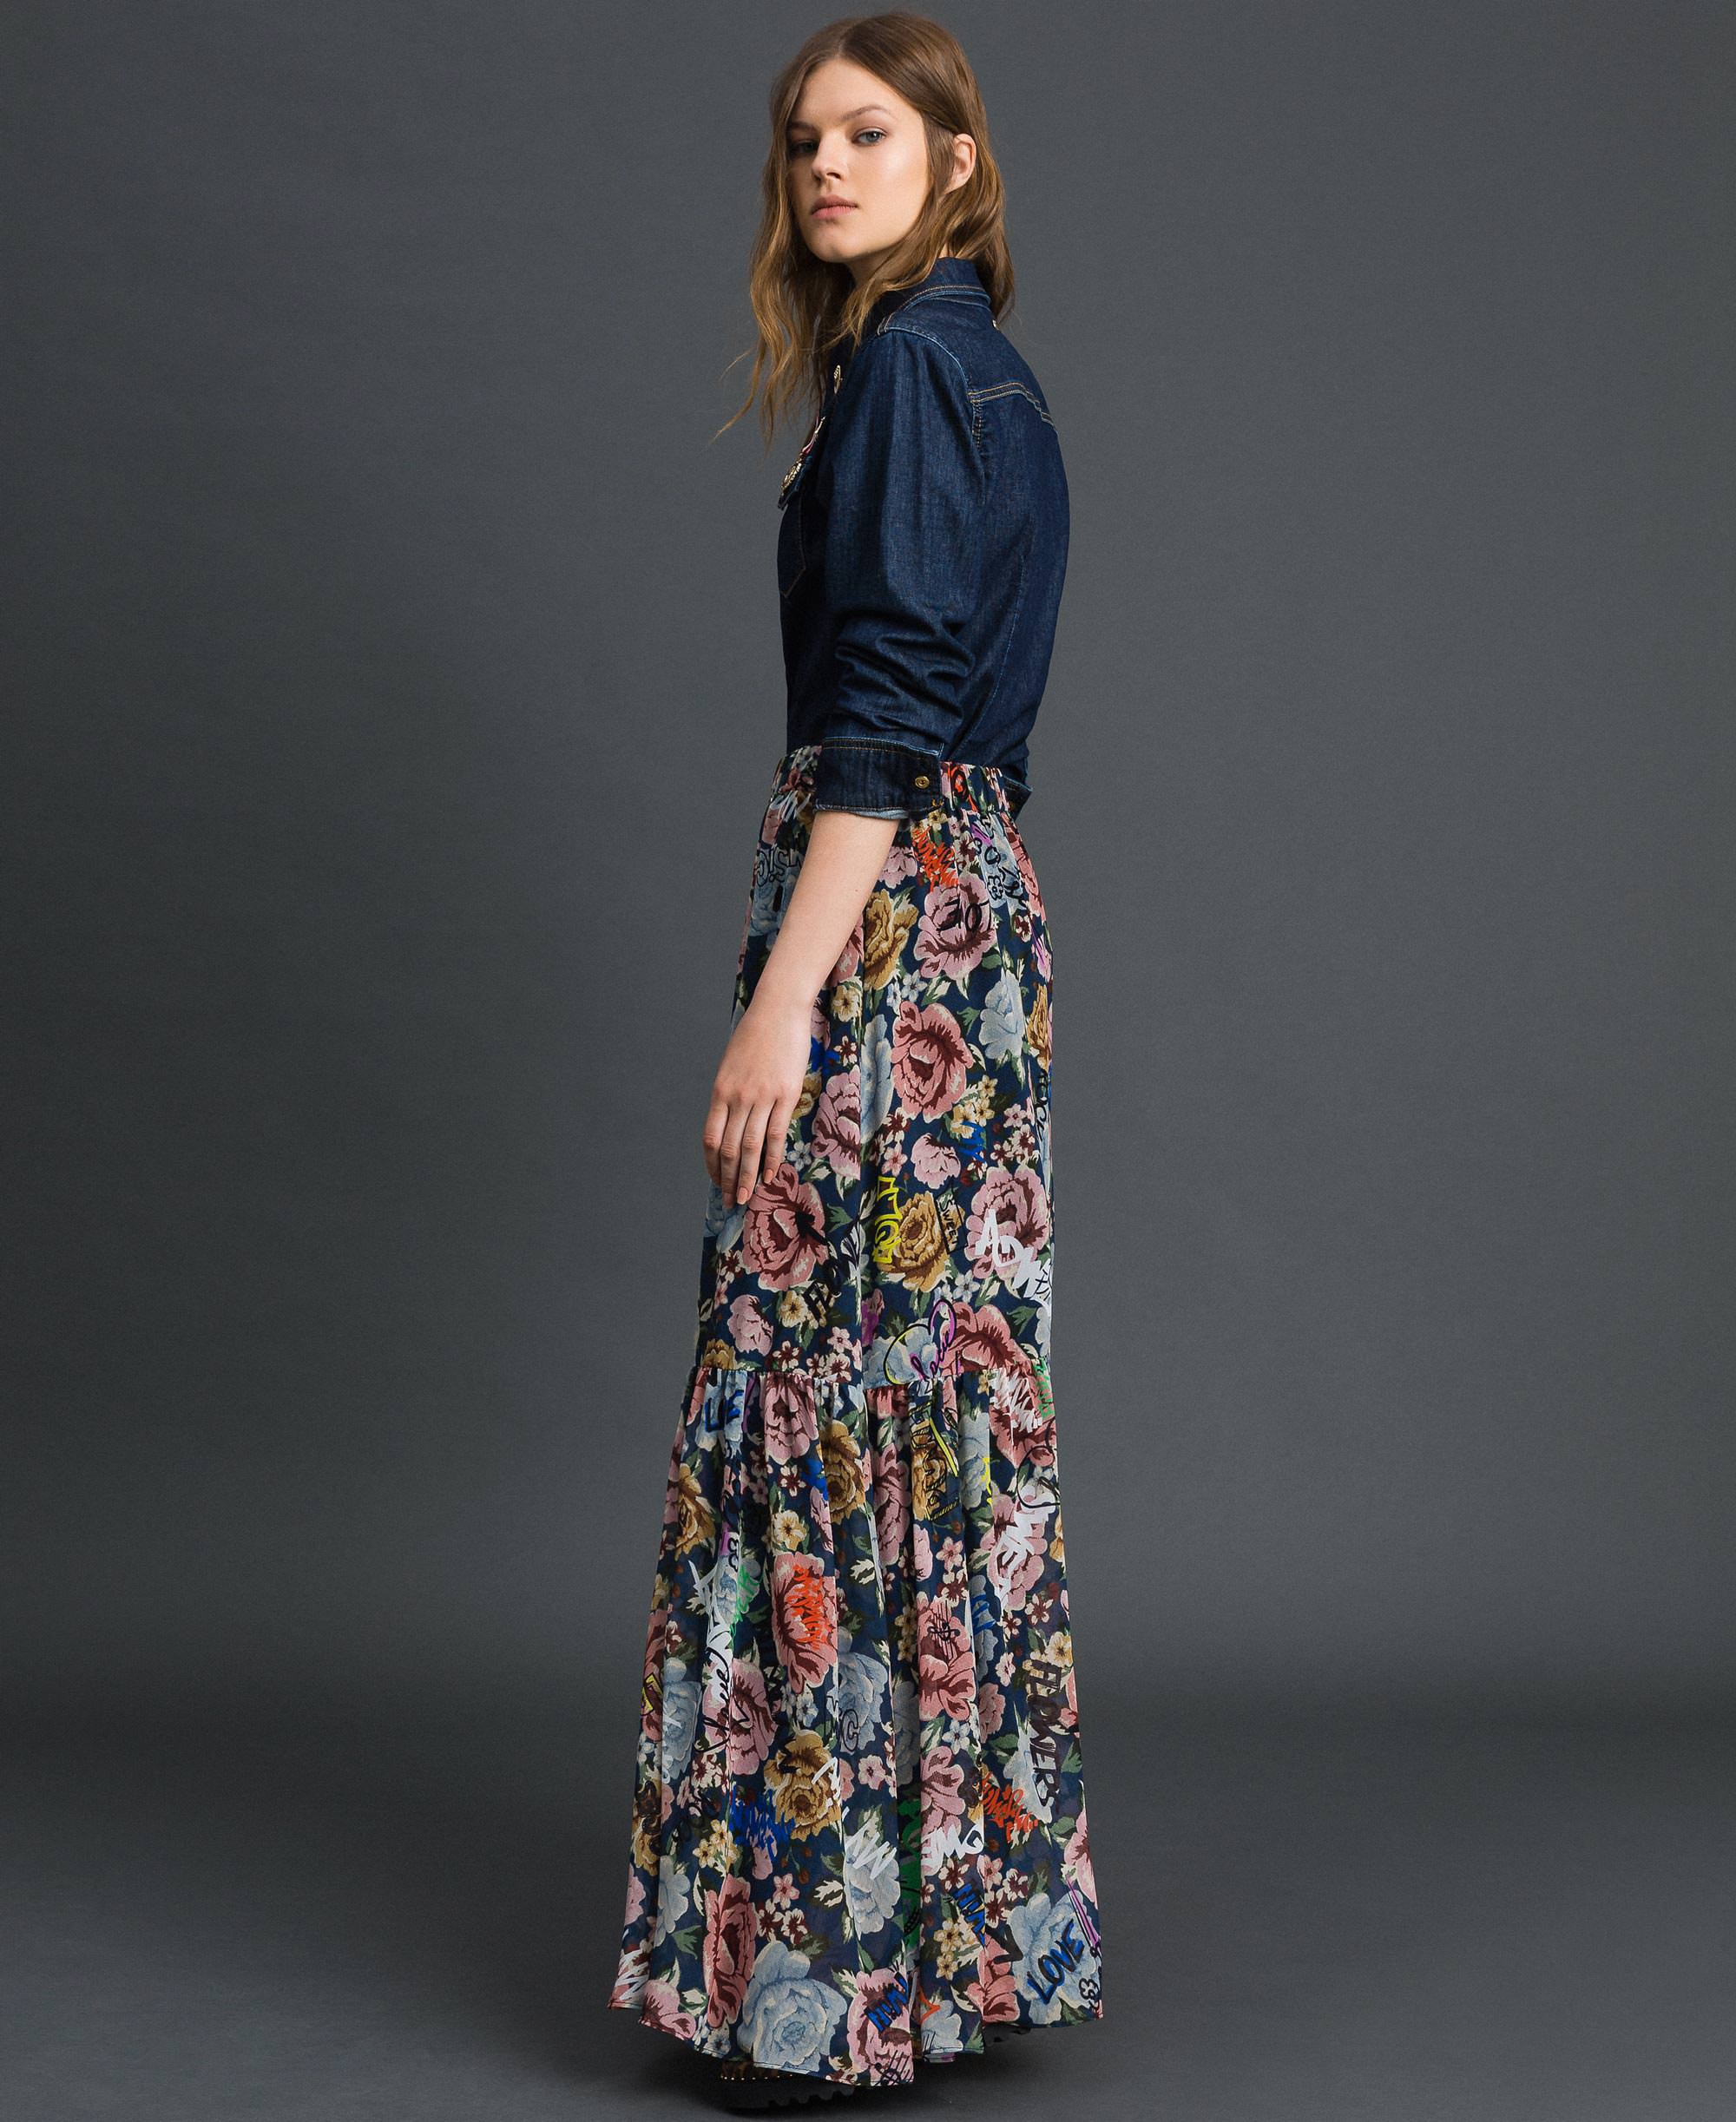 Long skirt with floral and graffiti print